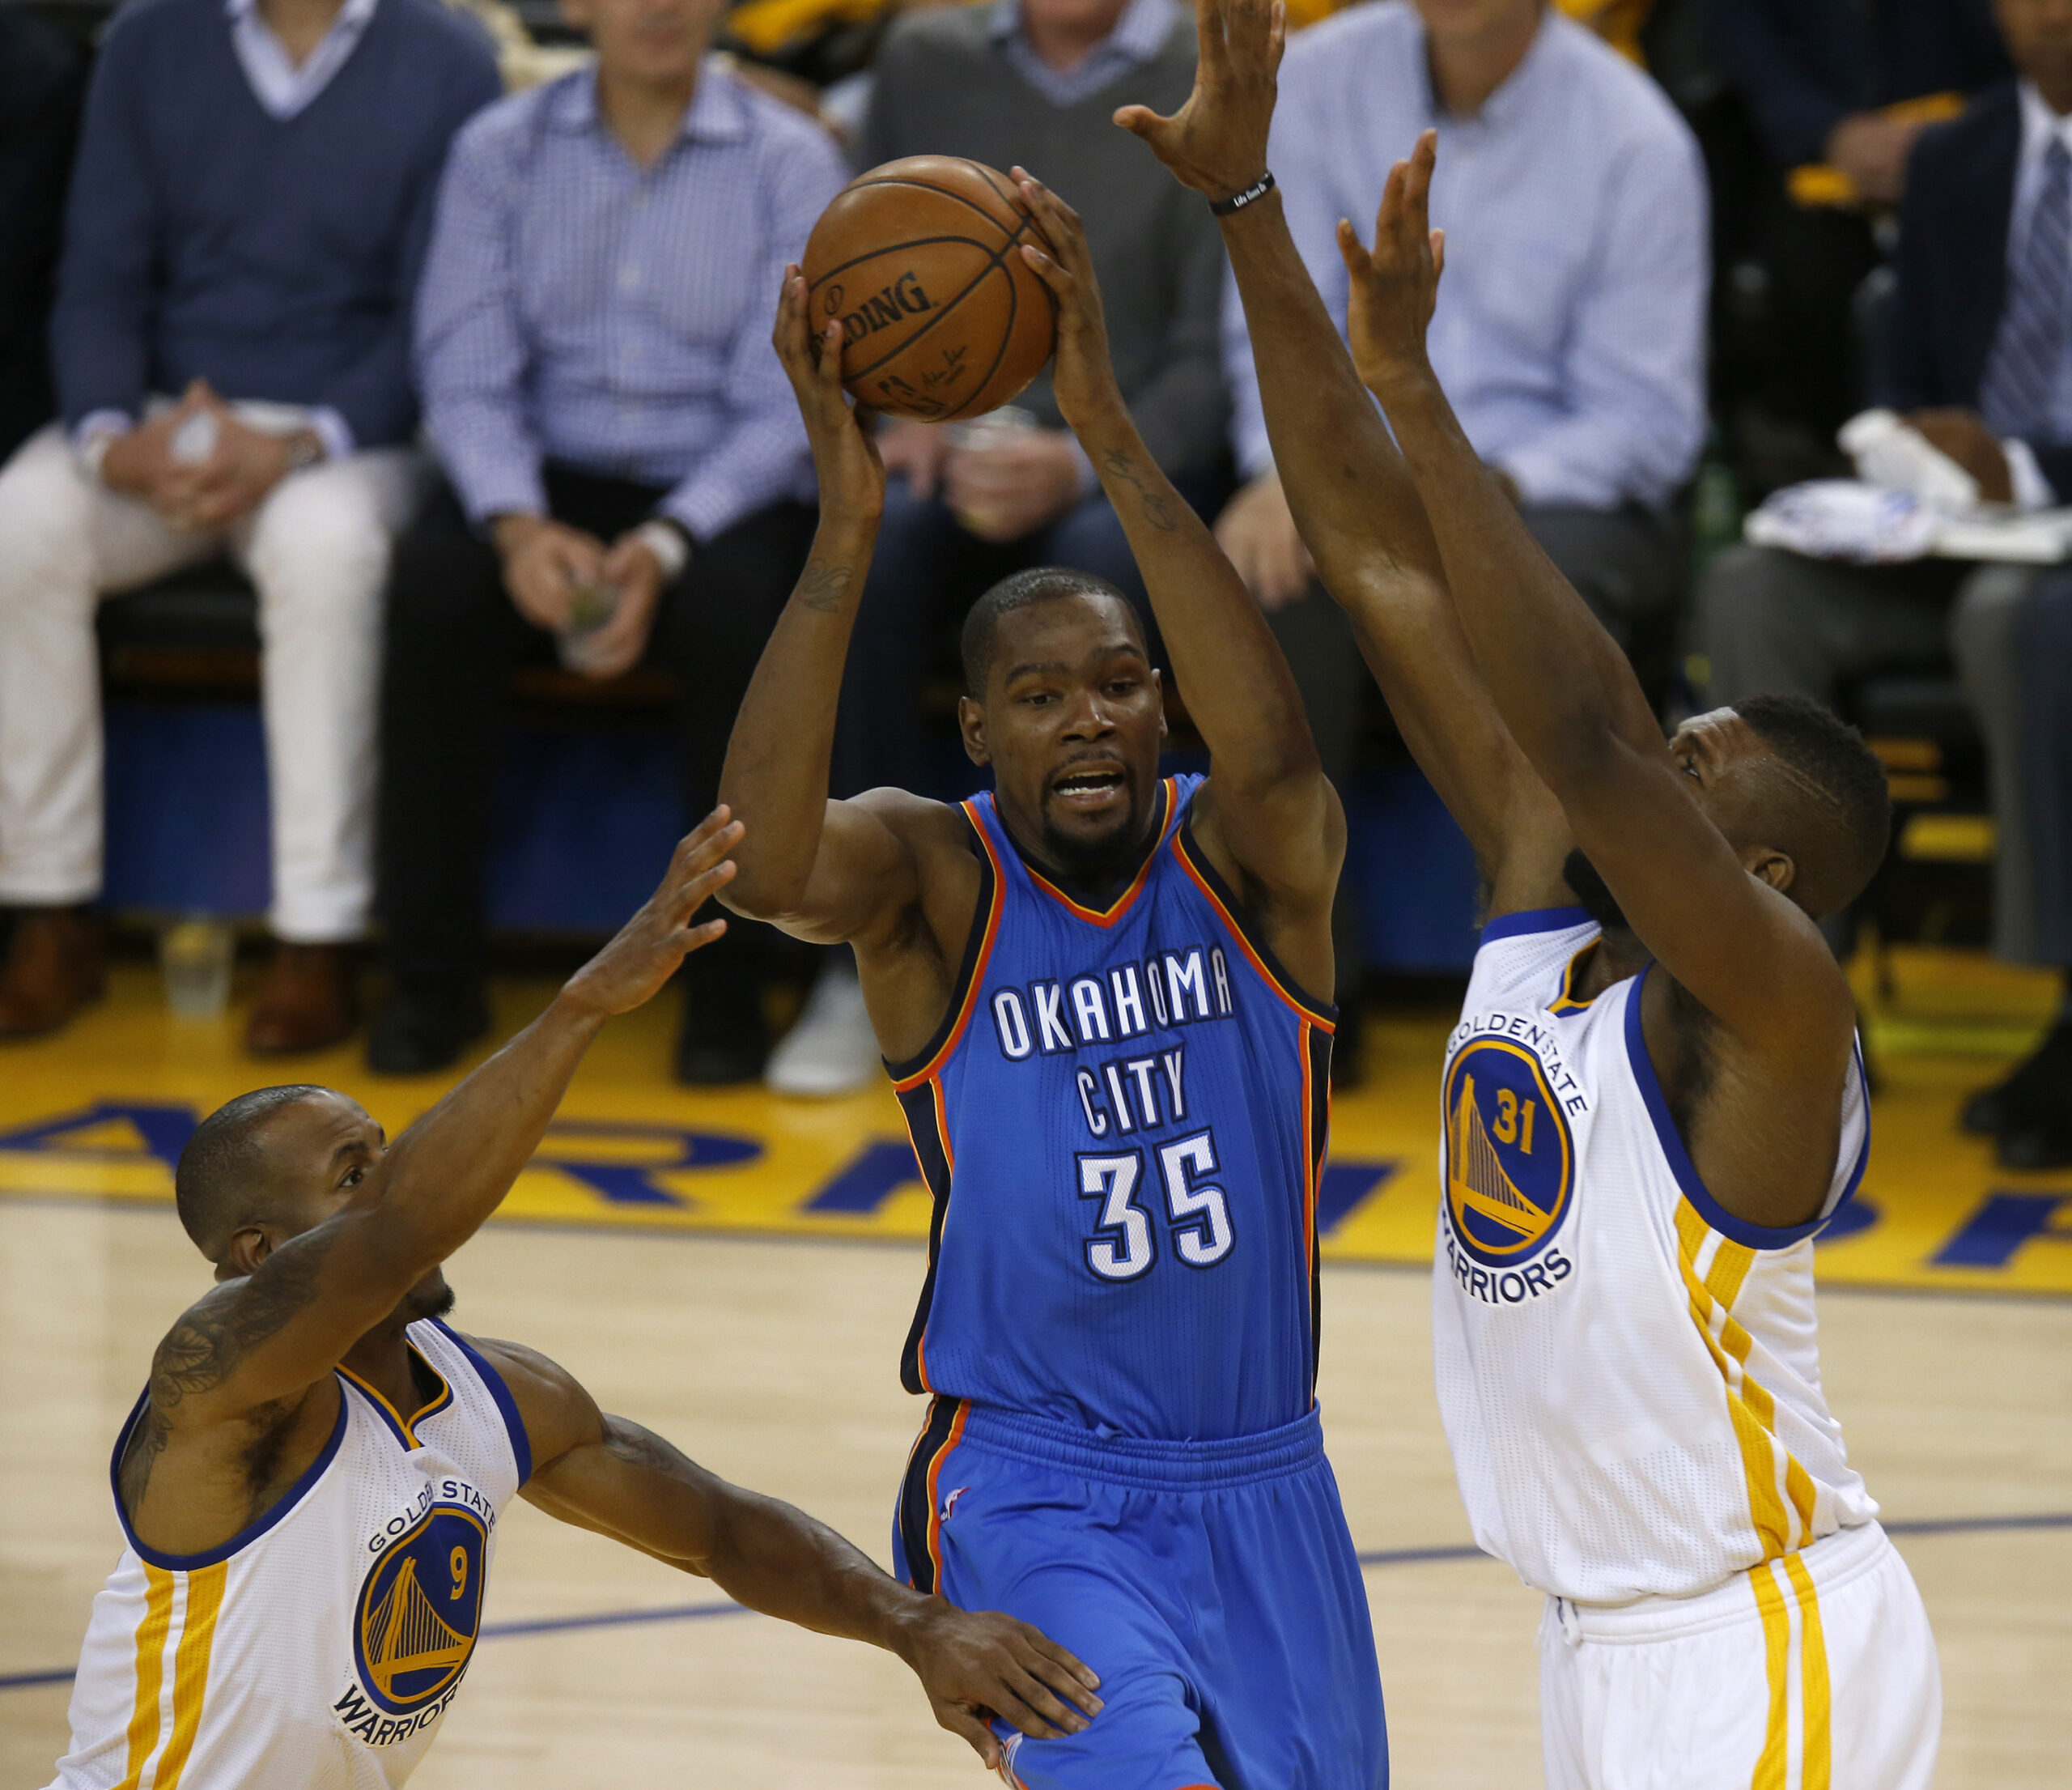 Oklahoma City Thunder's Kevin Durant (35) passes against Golden State Warriors' Festus Ezeli (31) in the second quarter of Game 1 of the NBA Western Conference finals at Oracle Arena on May 16, 2016 in Oakland, Calif. (Nhat V. Meyer/Bay Area News Group/TNS)